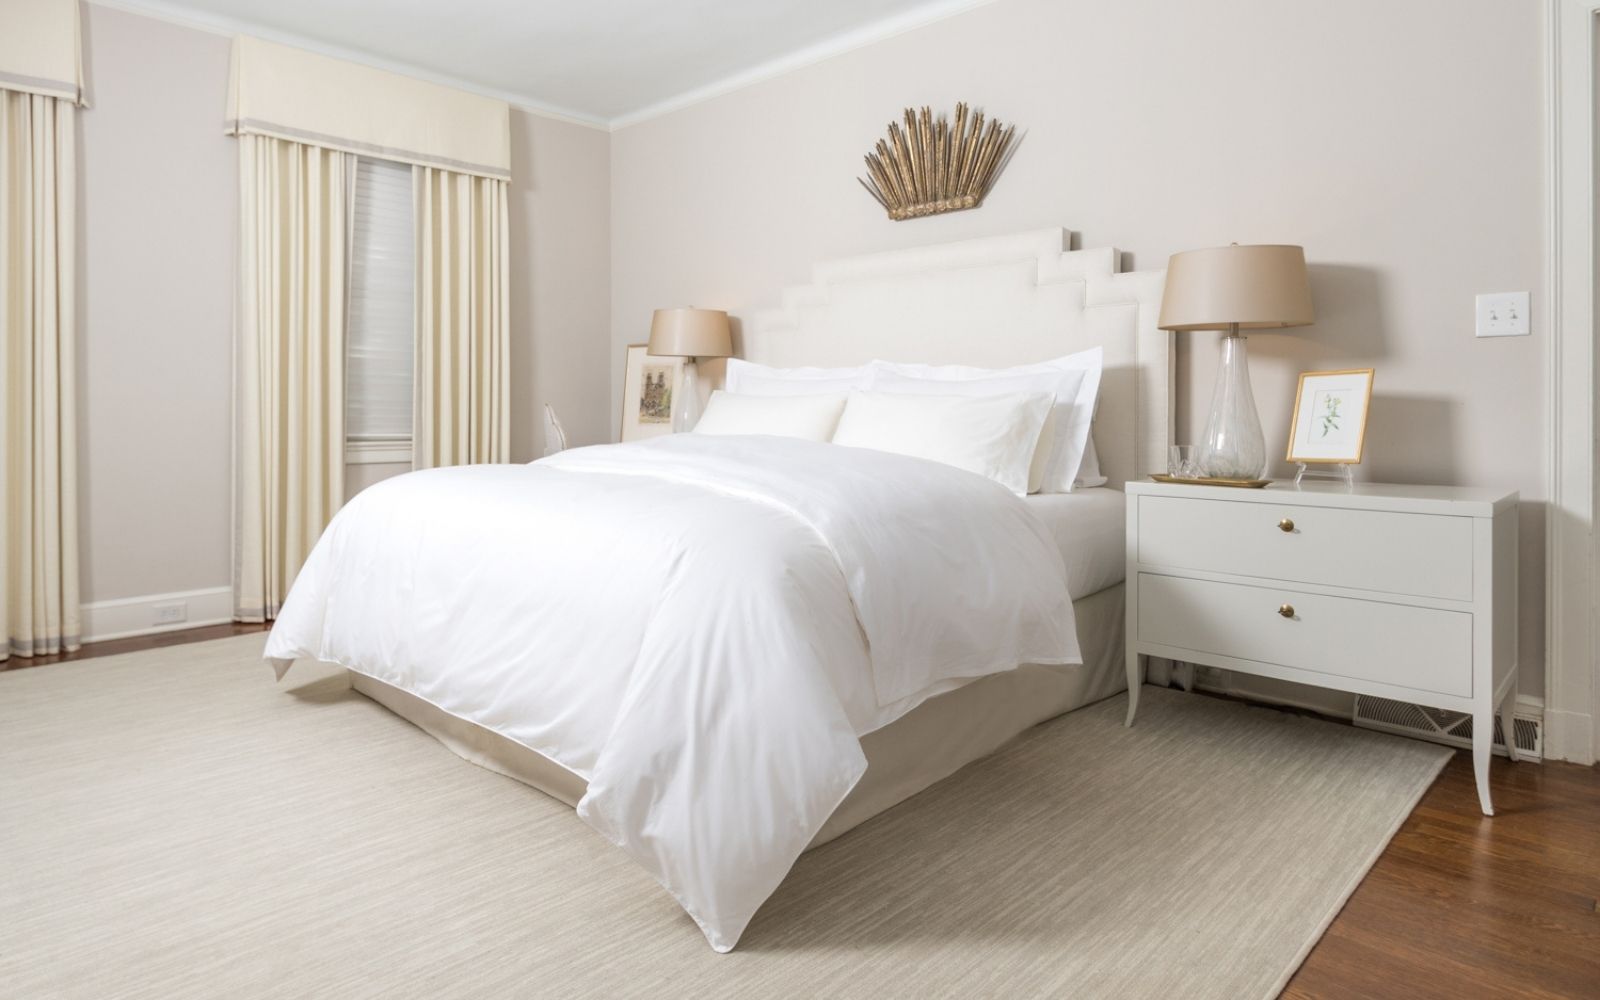 Master bedroom with percale sheets